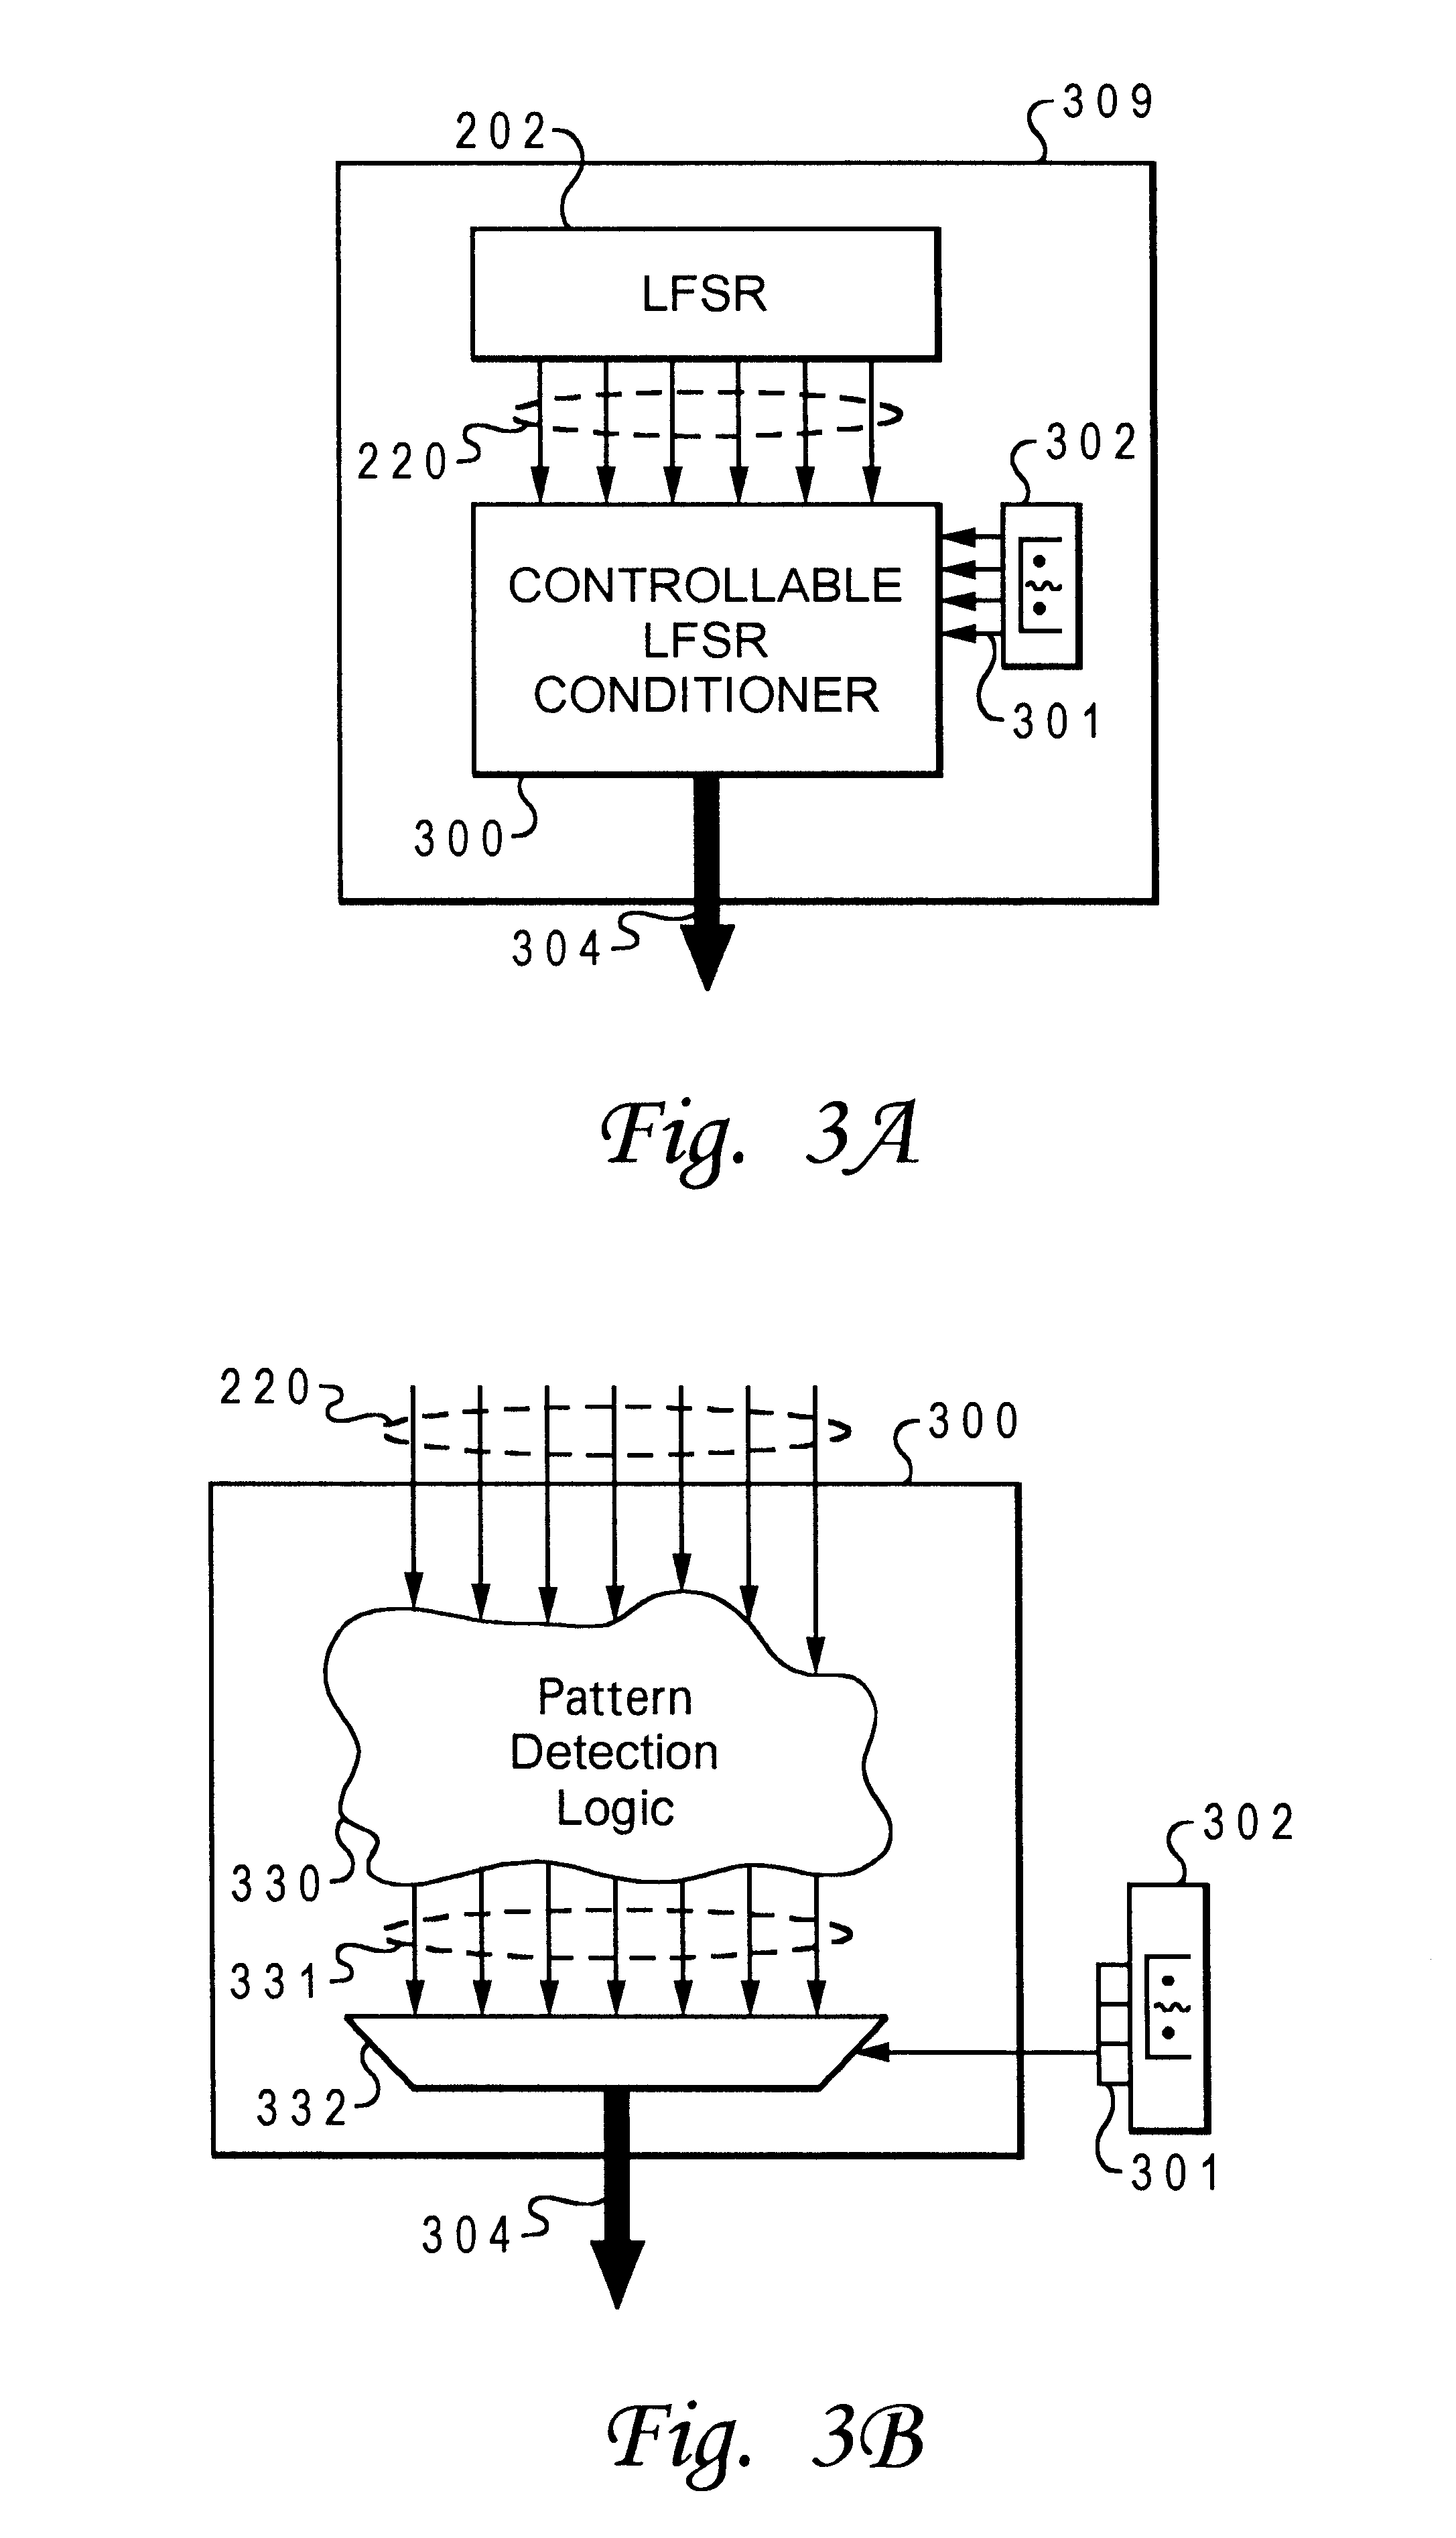 Method and system for run-time logic verification of operations in digital systems in response to a plurality of parameters